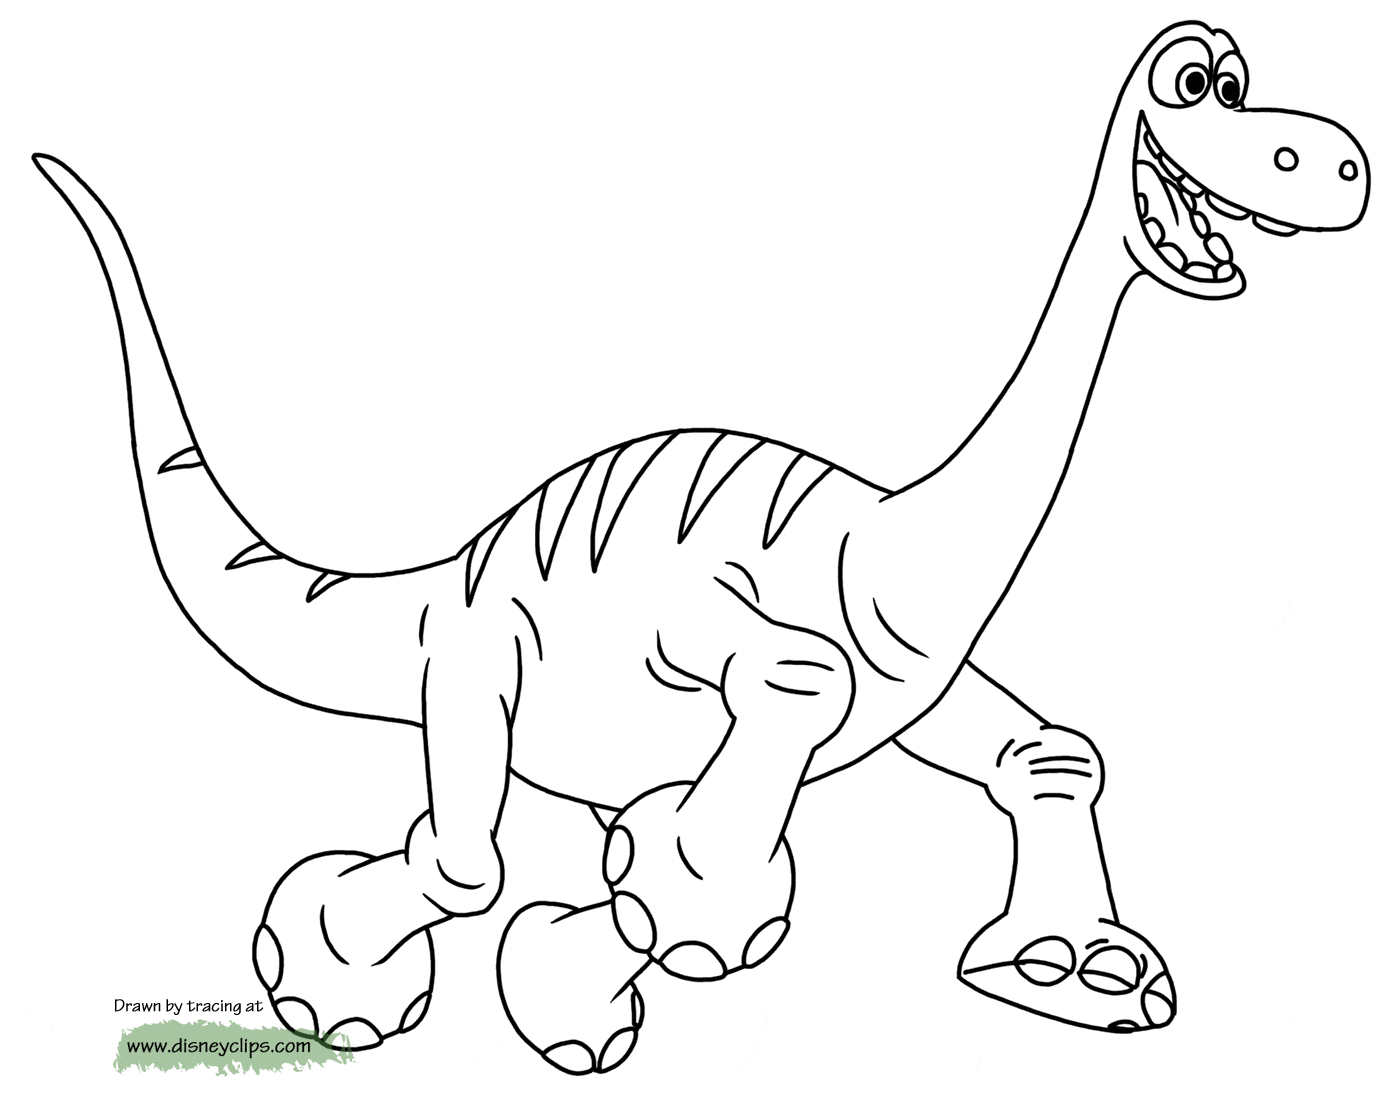 dinosaur color page baby dinosaur coloring pages to download and print for free dinosaur page color 